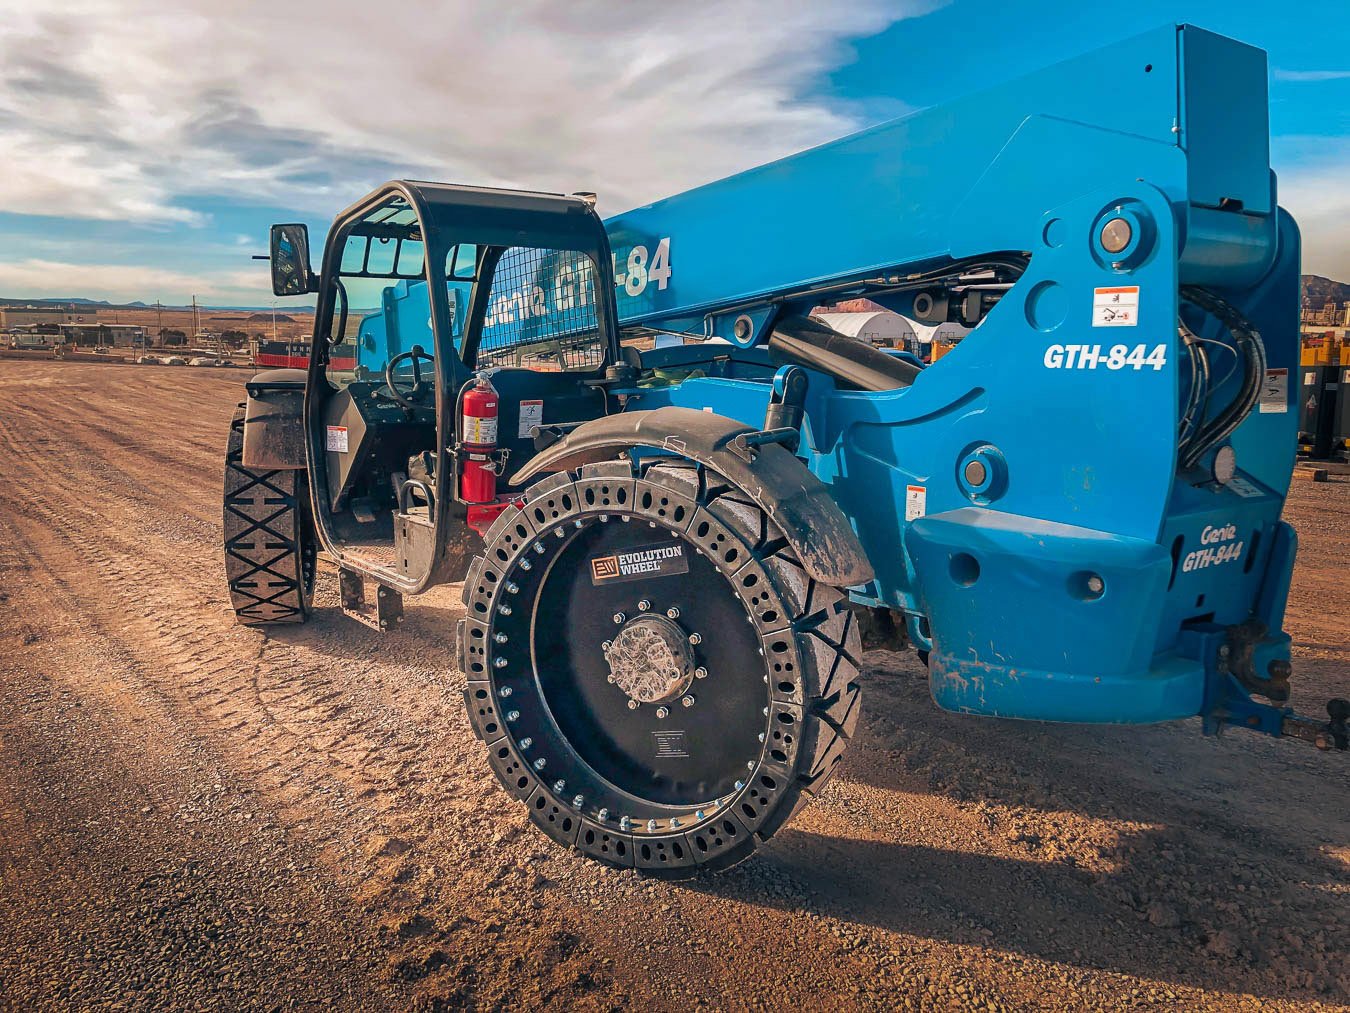 This image shows our Xtreme telehandler tires for a blue Genie telehandler.